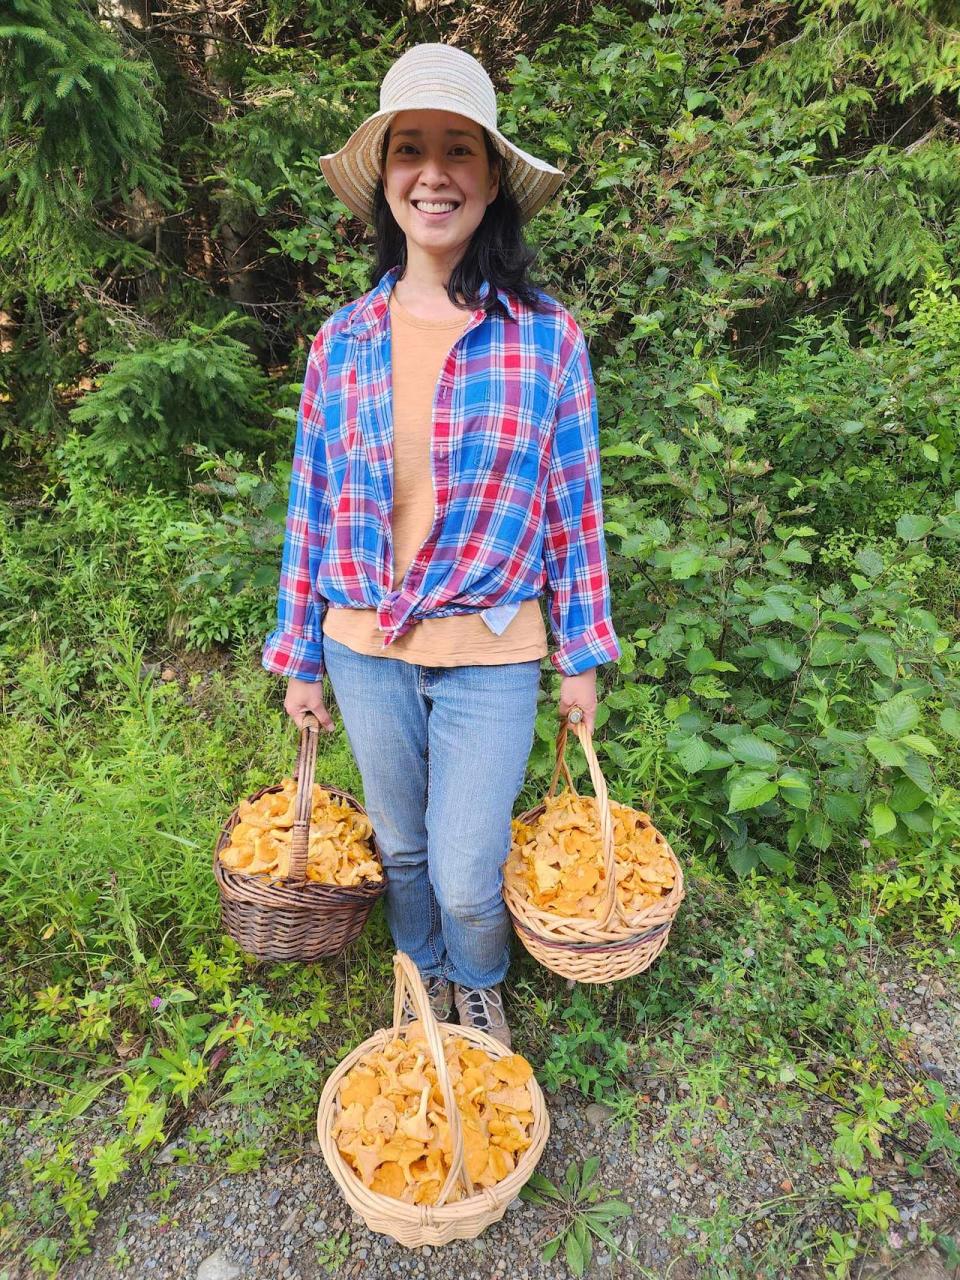 Foragers across the province are noticing a rise in mushroom, especially chanterelle, growth this season. 